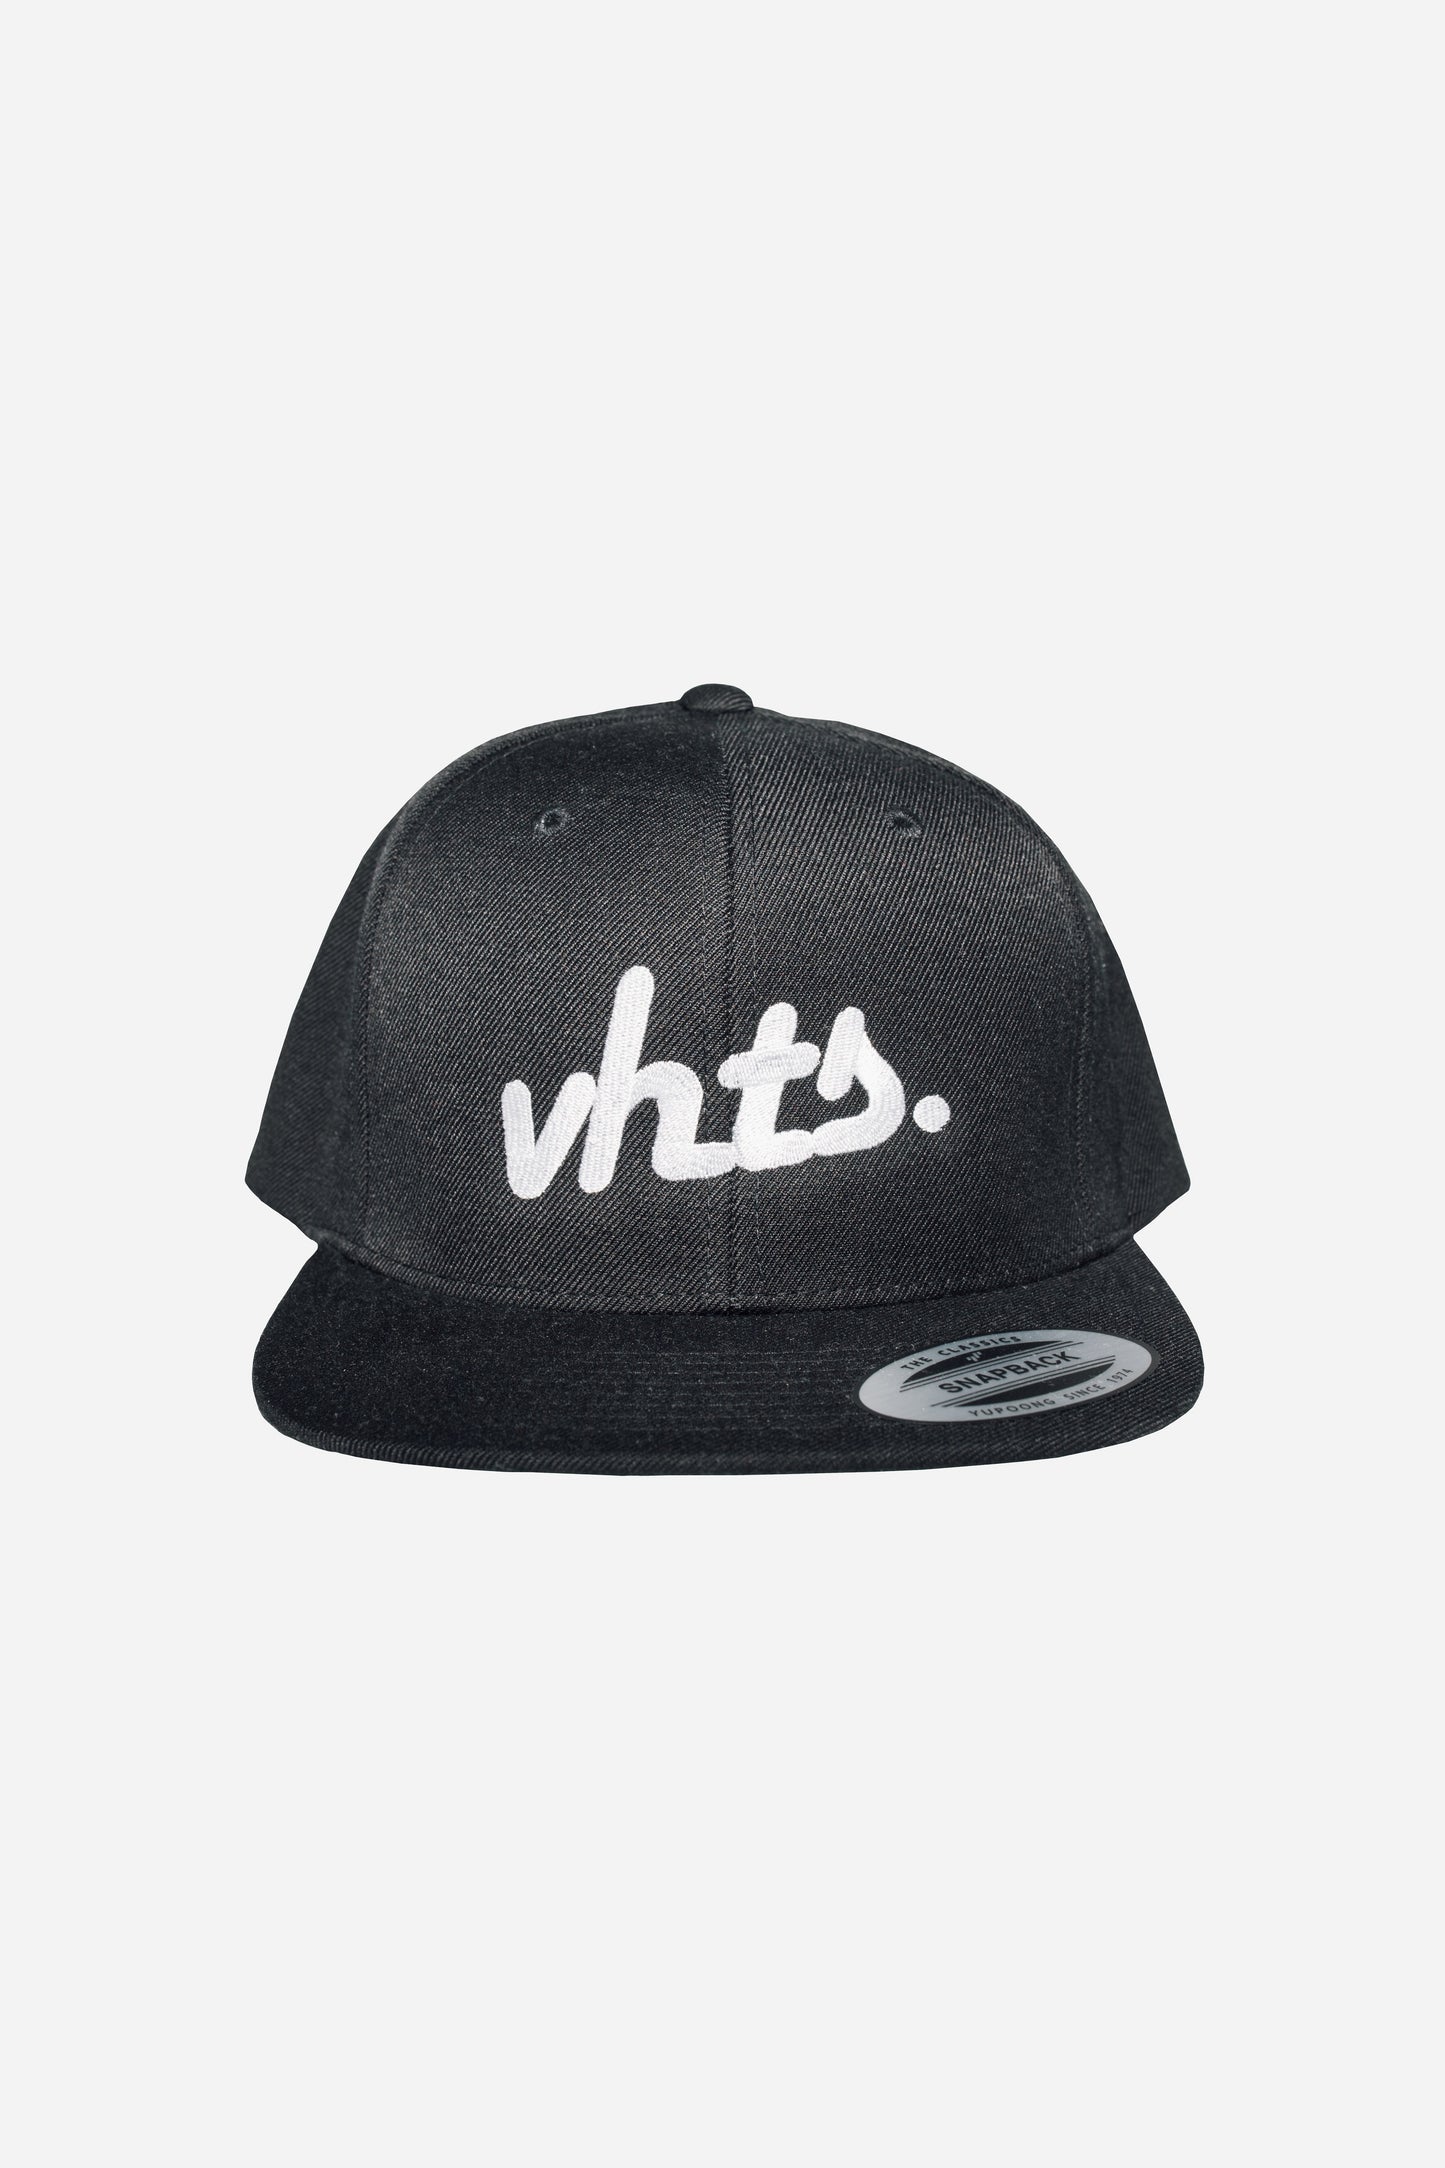 VHTS CLASSIC Snapback One Size Color: Black Embroidery: White shell fabric 1: 80% acrylic 20% wool, A/WOOL SERGE, 382 GSM vhts europe